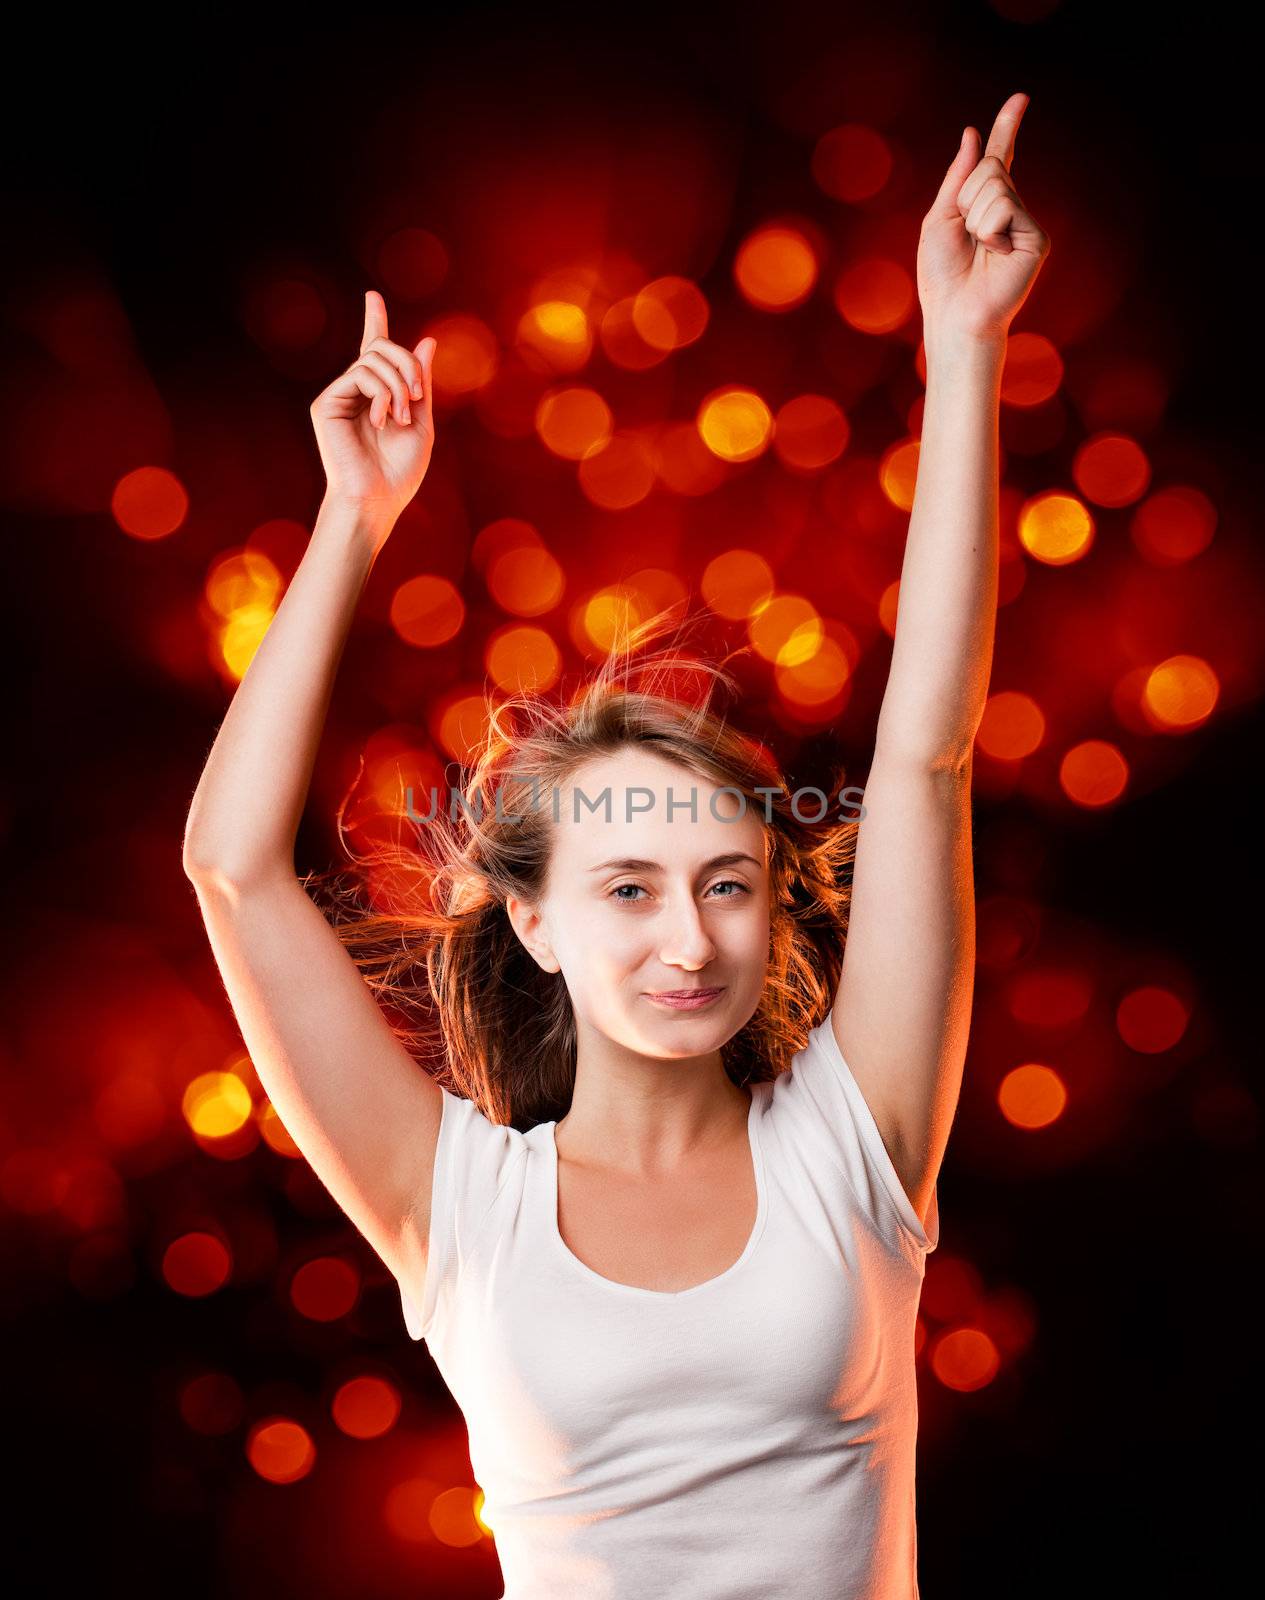 Portrait of a beautiful young woman dancing on a dark background with soft red spots